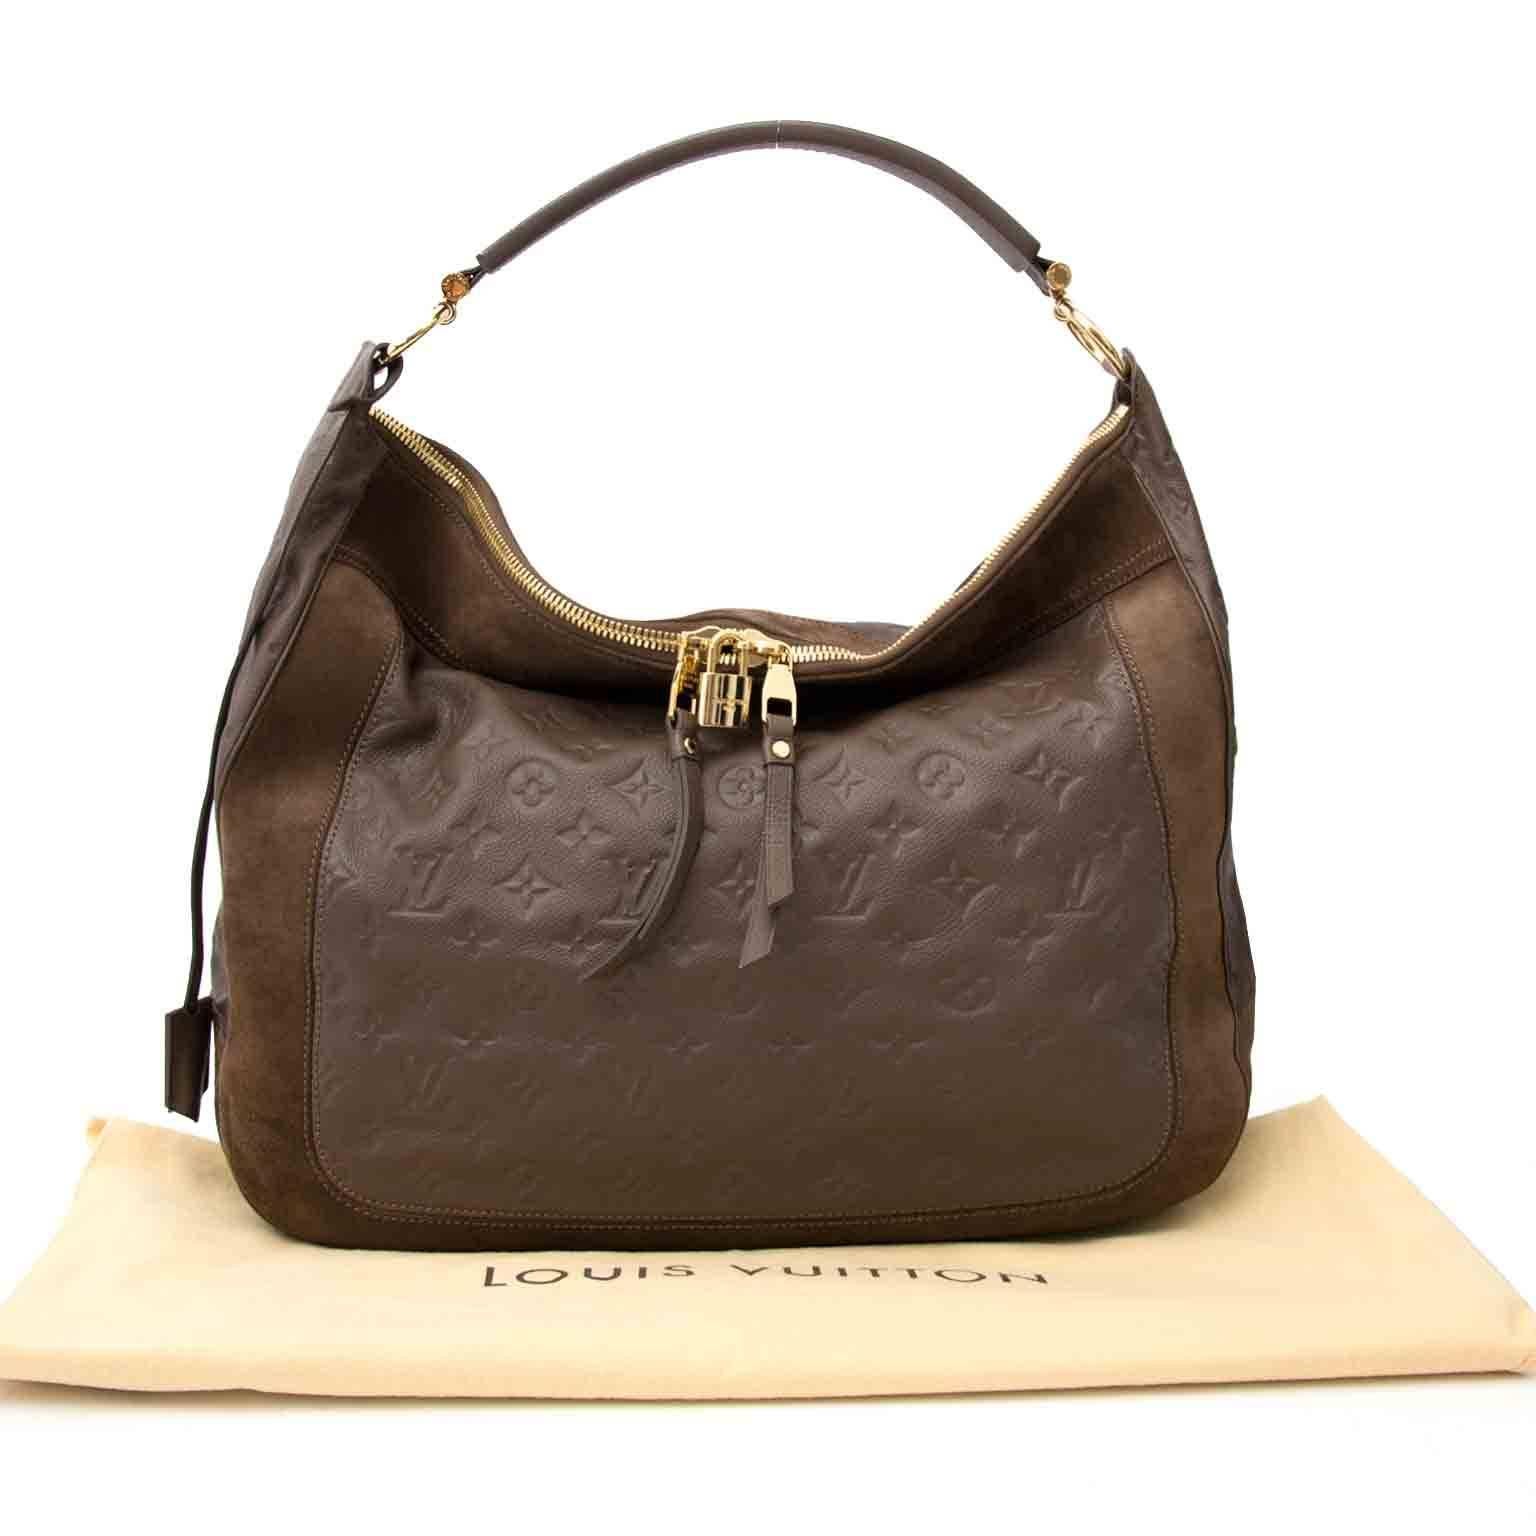 Very good condition

Retail price: €2270

Louis Vuitton Brown Audacieuse Empreinte GM Bag

The Audacieuse captures the essence of everyday refinement.
The unique combination of the suede and the embossed empreinte leather gives this bag a gorgeous